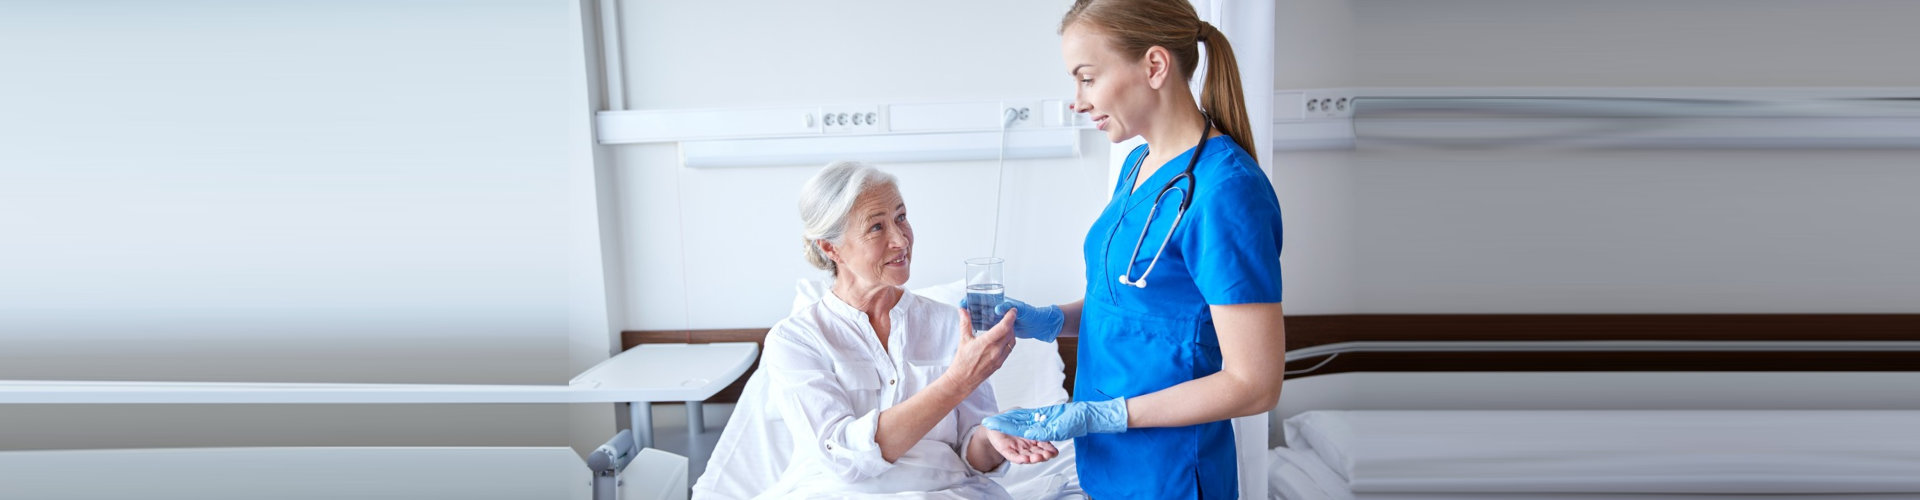 female nurse giving medication and a glass of water to senior woman